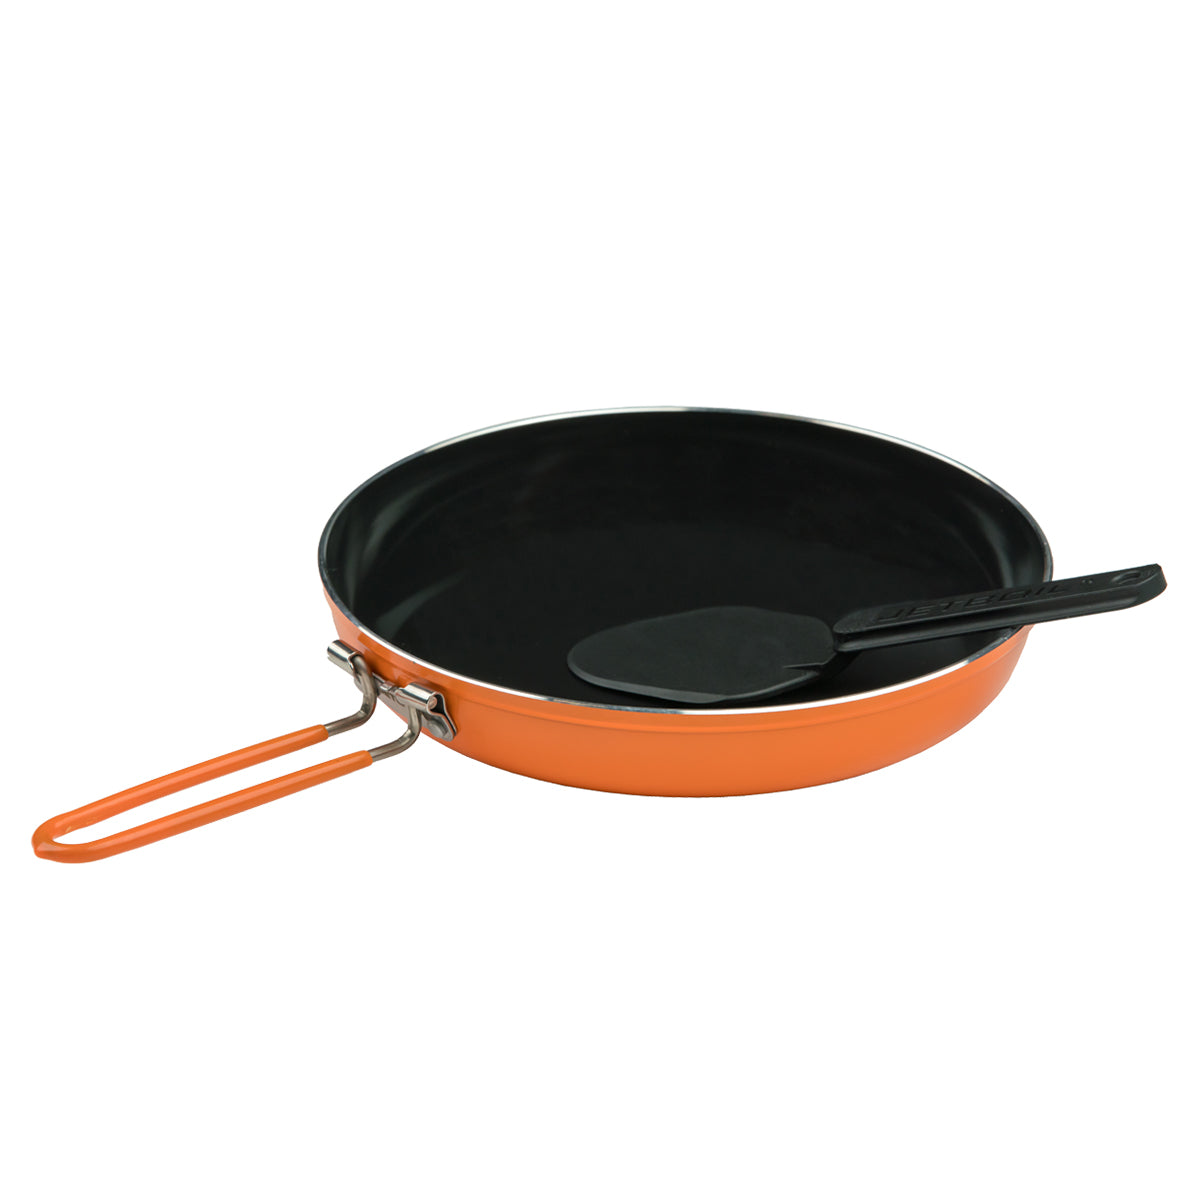 Jetboil Summit Skillet by Jetboil | Camping - goHUNT Shop